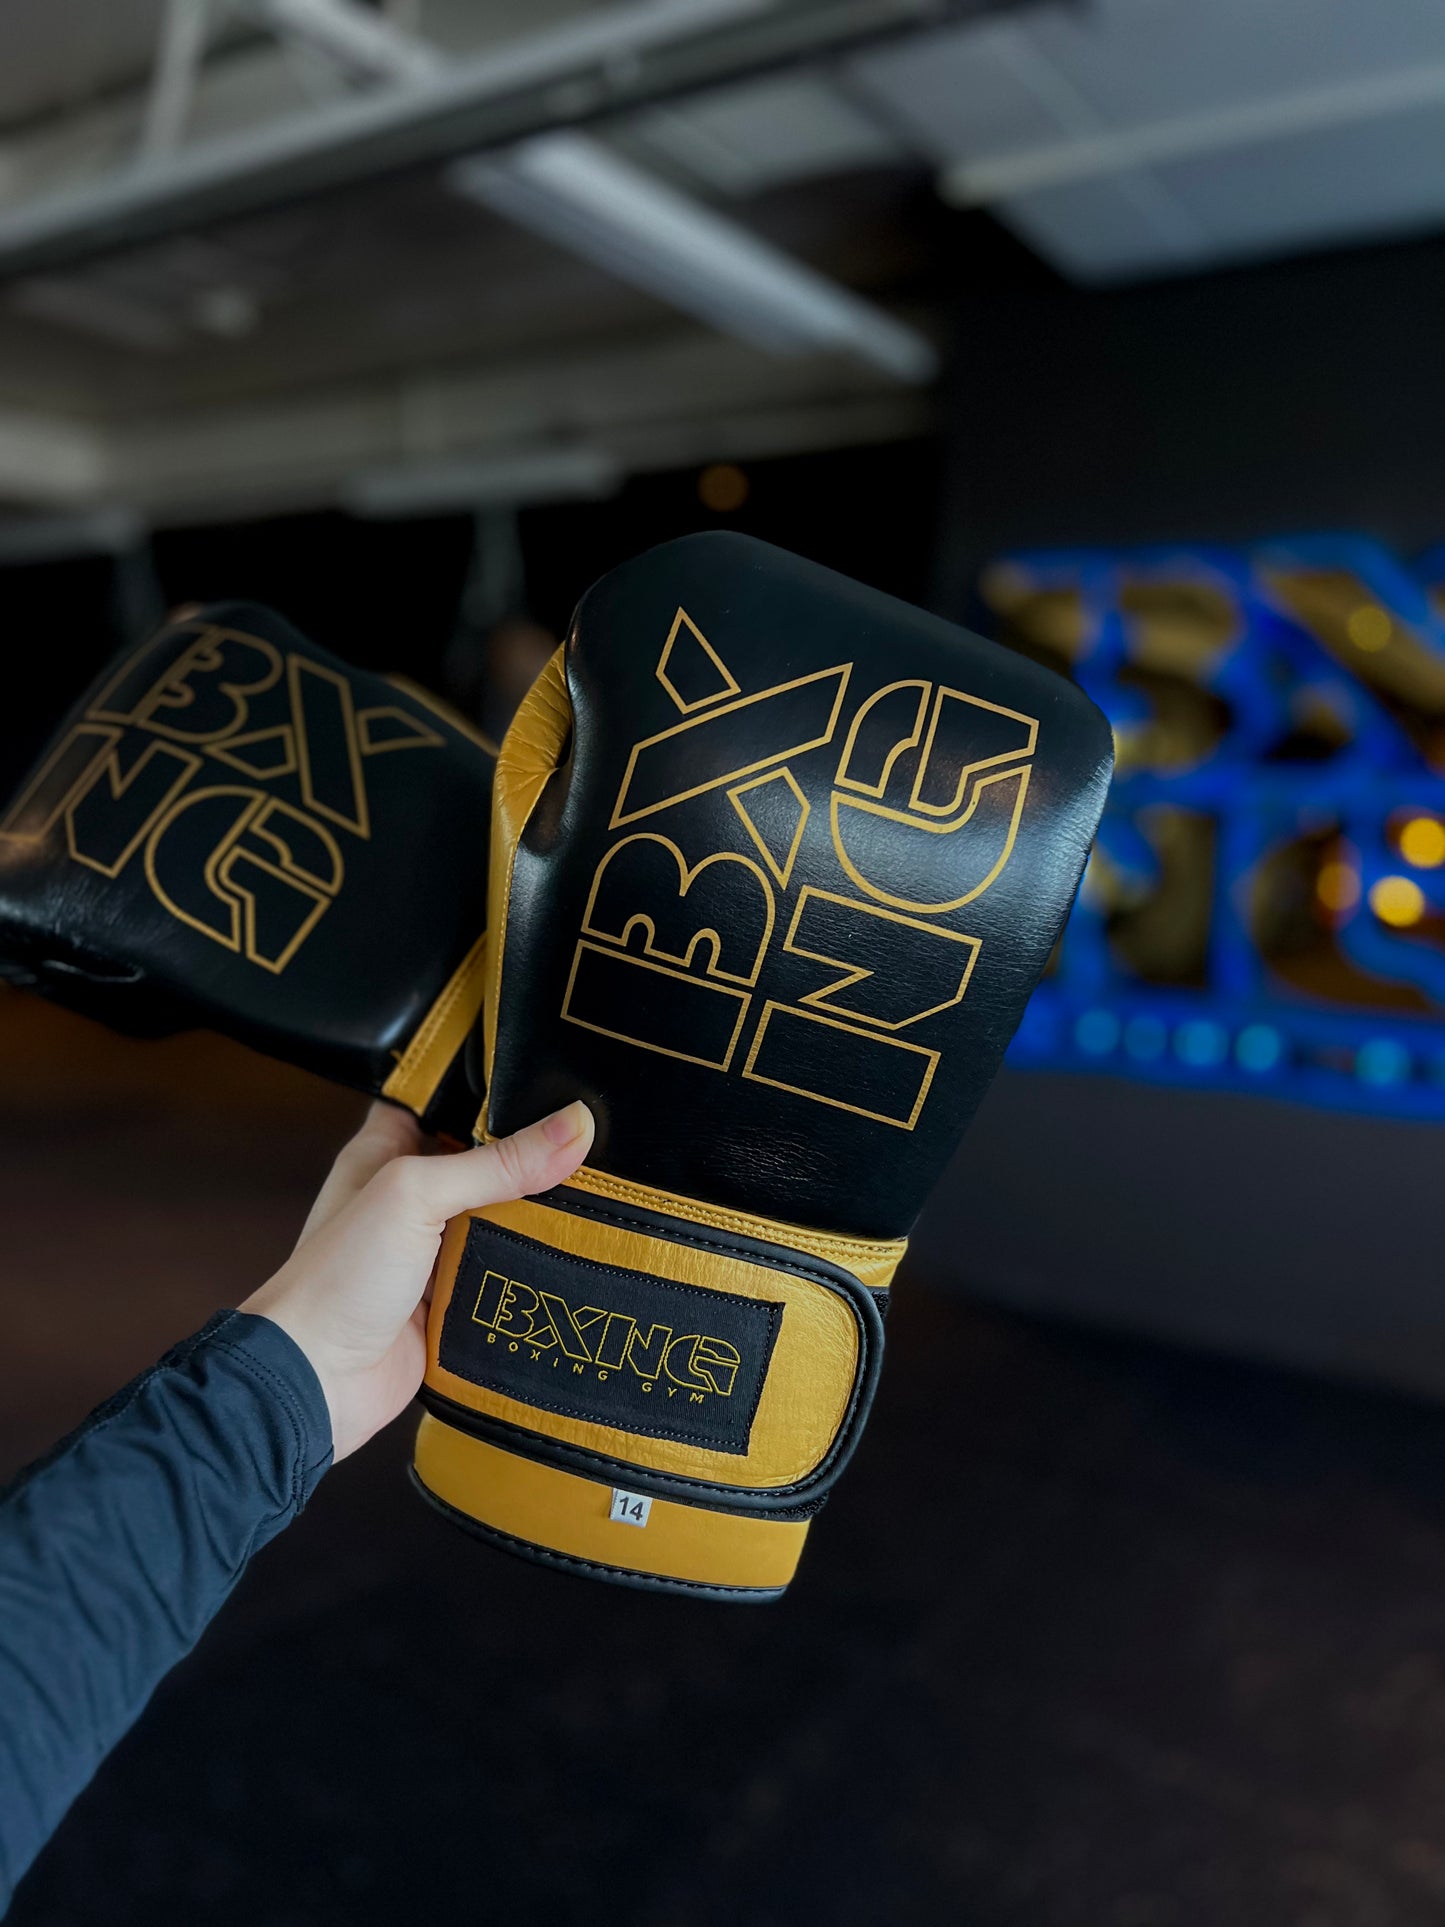 BXNG 1st Generation boxing gloves | Genuine Leather